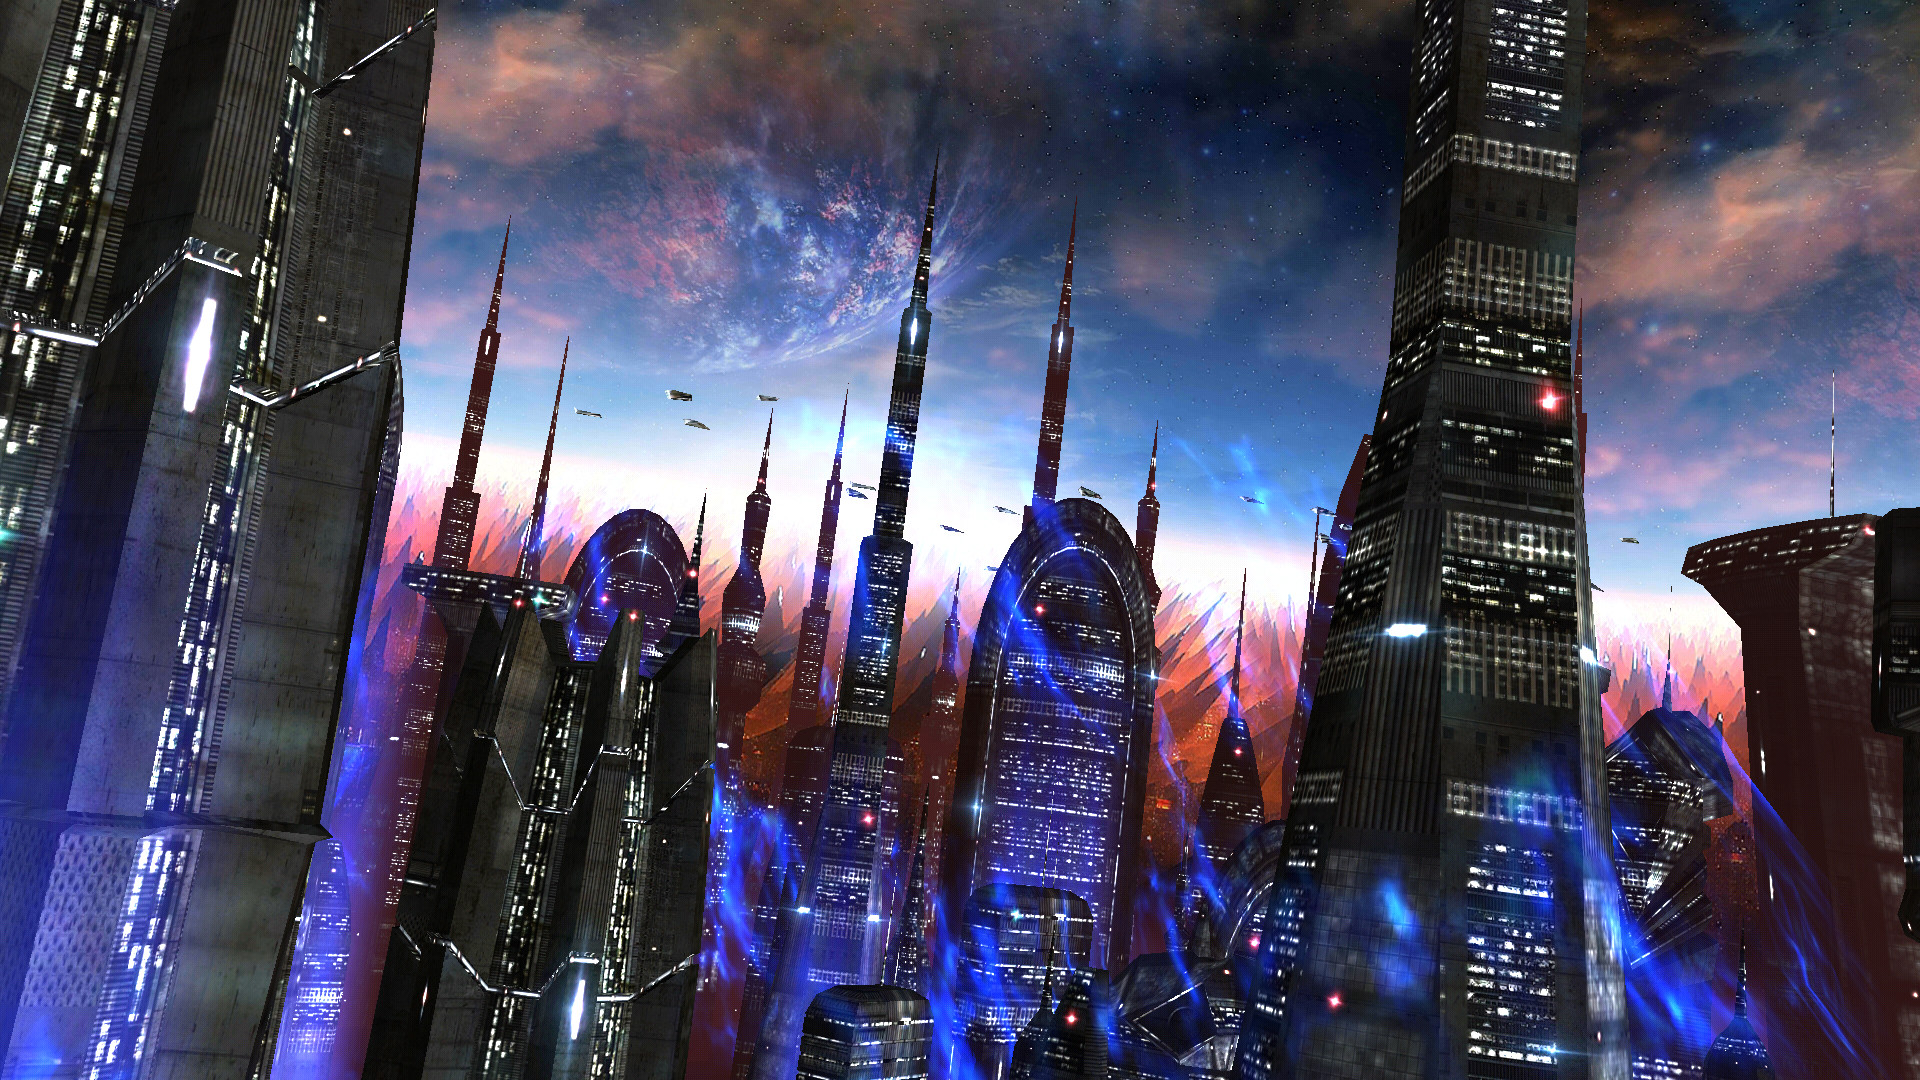 Space Colony turns your home screen into an alien cityscape with towering  buildings, epic star-filled skies, and glowing starships flying past.